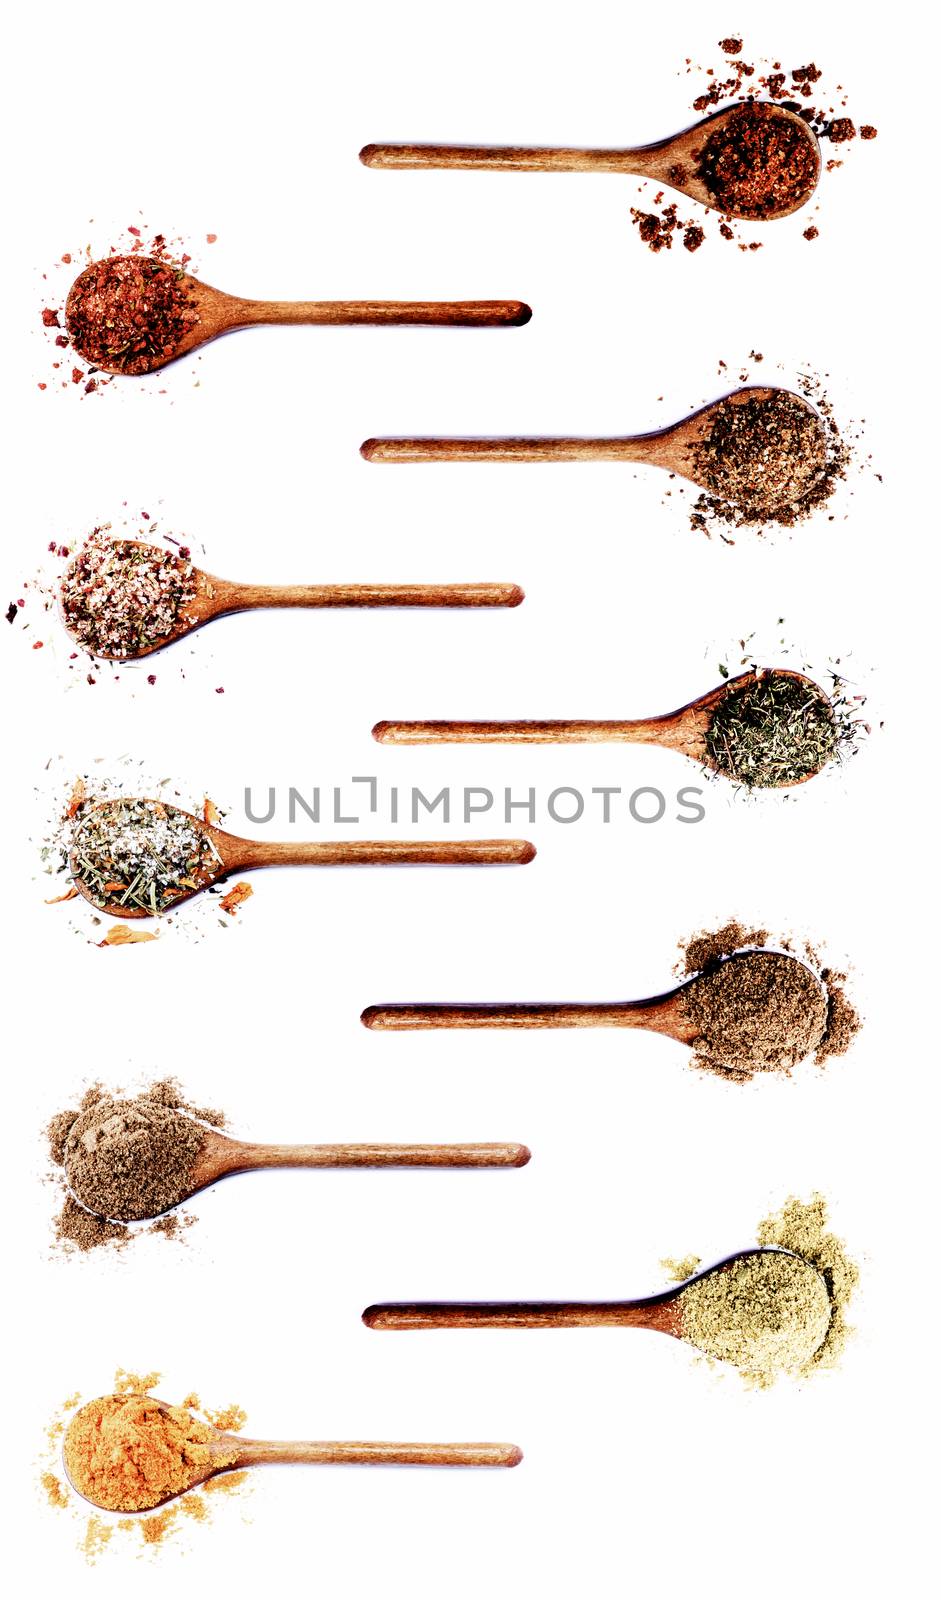 Collection of Various Spices in Wooden Spoons: Dried Paprika, Dried Chili, Salt with Chili, Salt with Cayenne Pepper, Coriander, Salt with Petals, Cumin Powder, Thyme, Zira and Curry Powder on White background